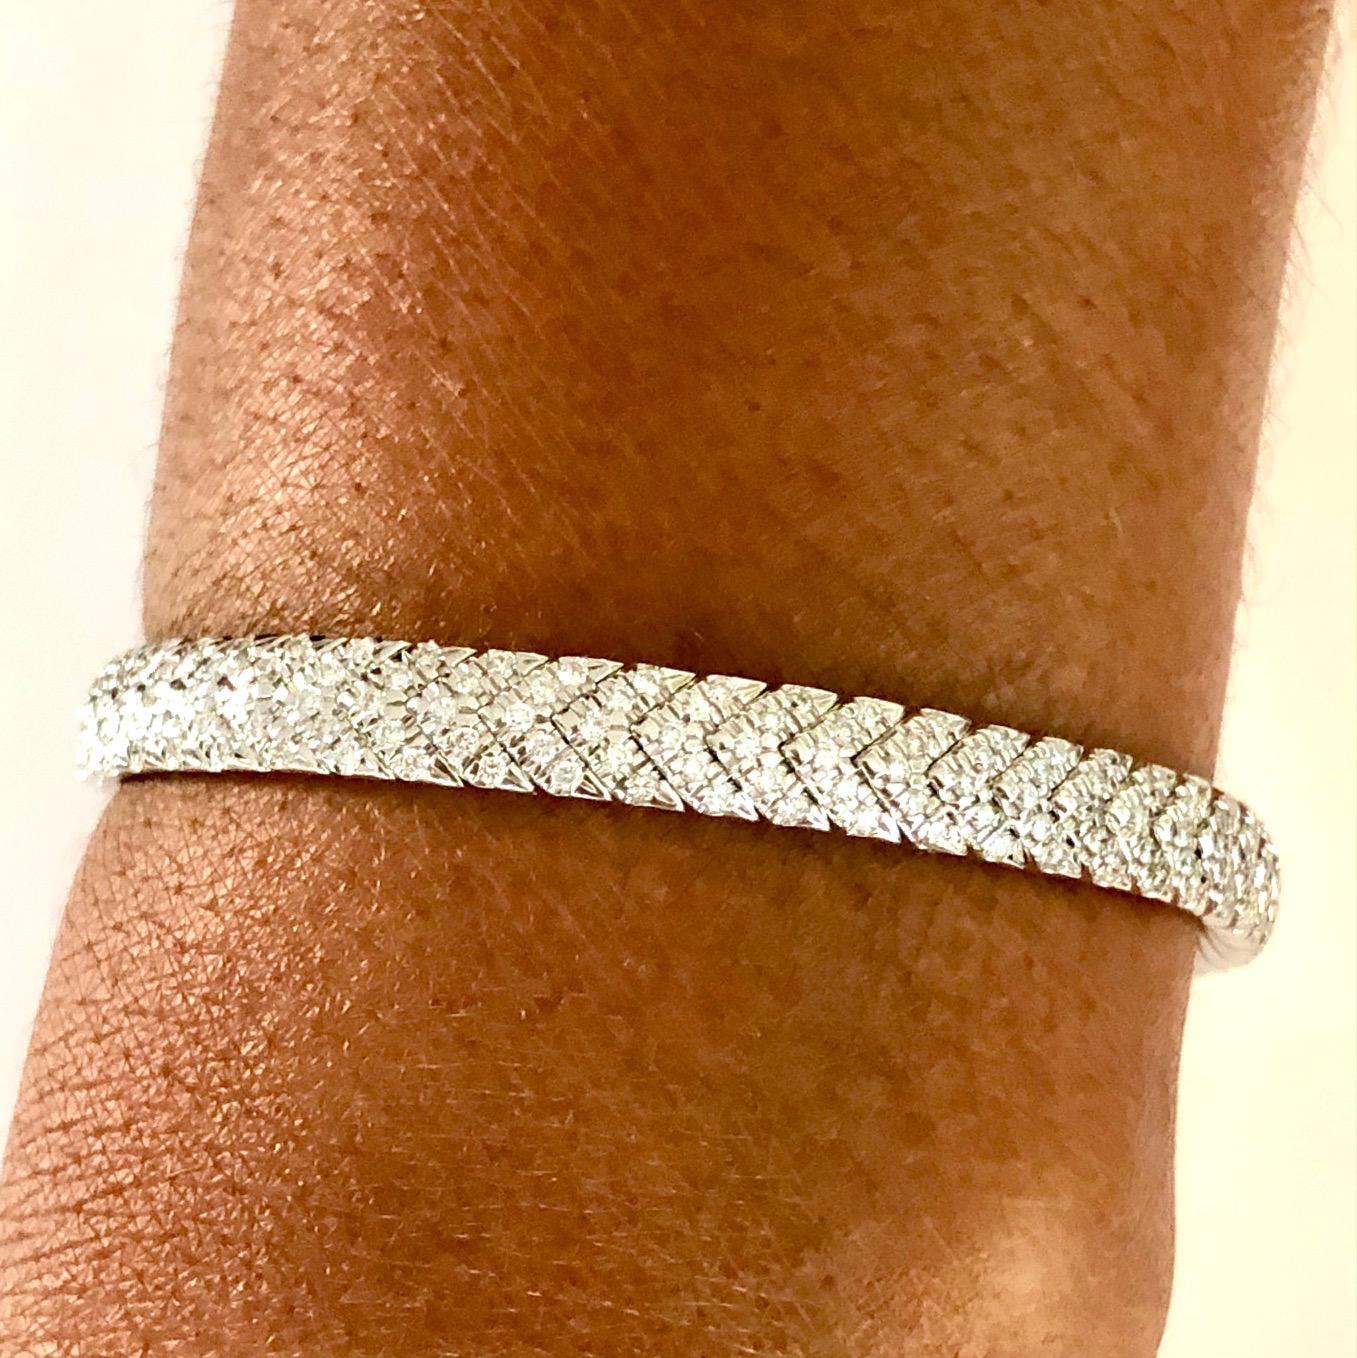 Soft, comfortable and stylish, this flexible Diamond Bangle Bracelet is the perfect all day accessory, set with 250 round Diamonds 2.58 carats.
Available also in 18K Yellow Gold.

We design and manufacture our jewelry in our workshop, located in New